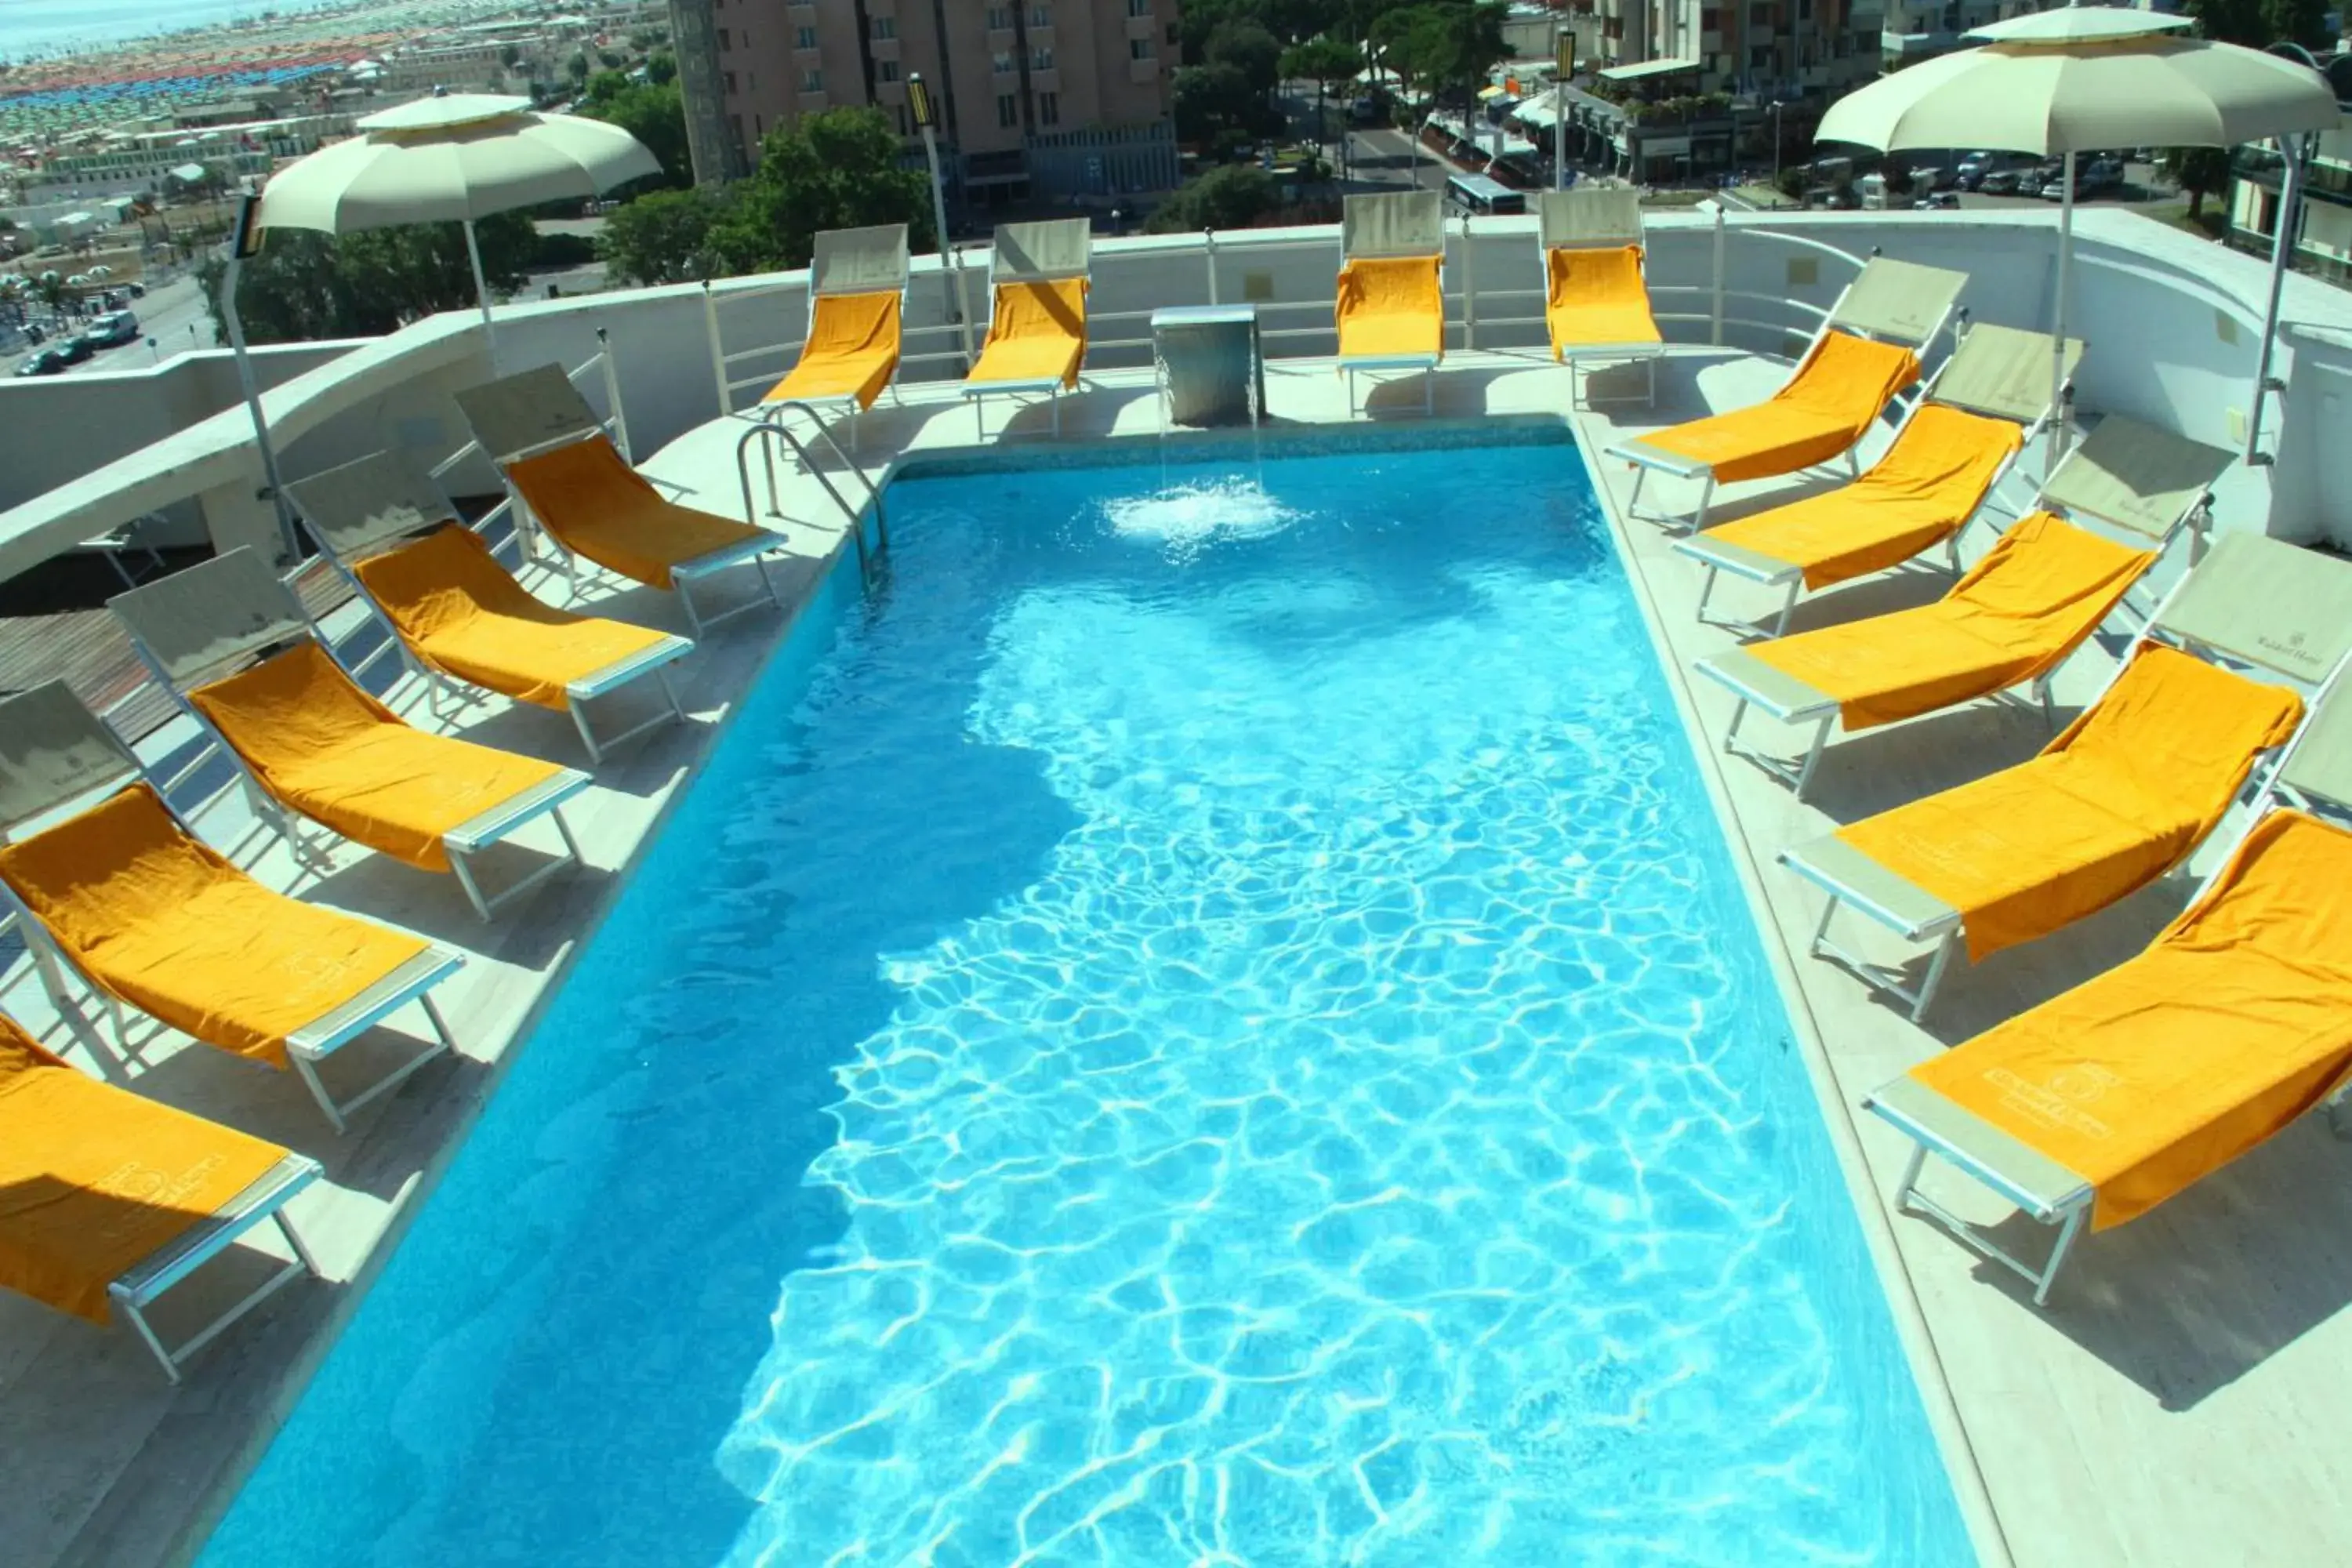 Property building, Pool View in Waldorf Suite Hotel